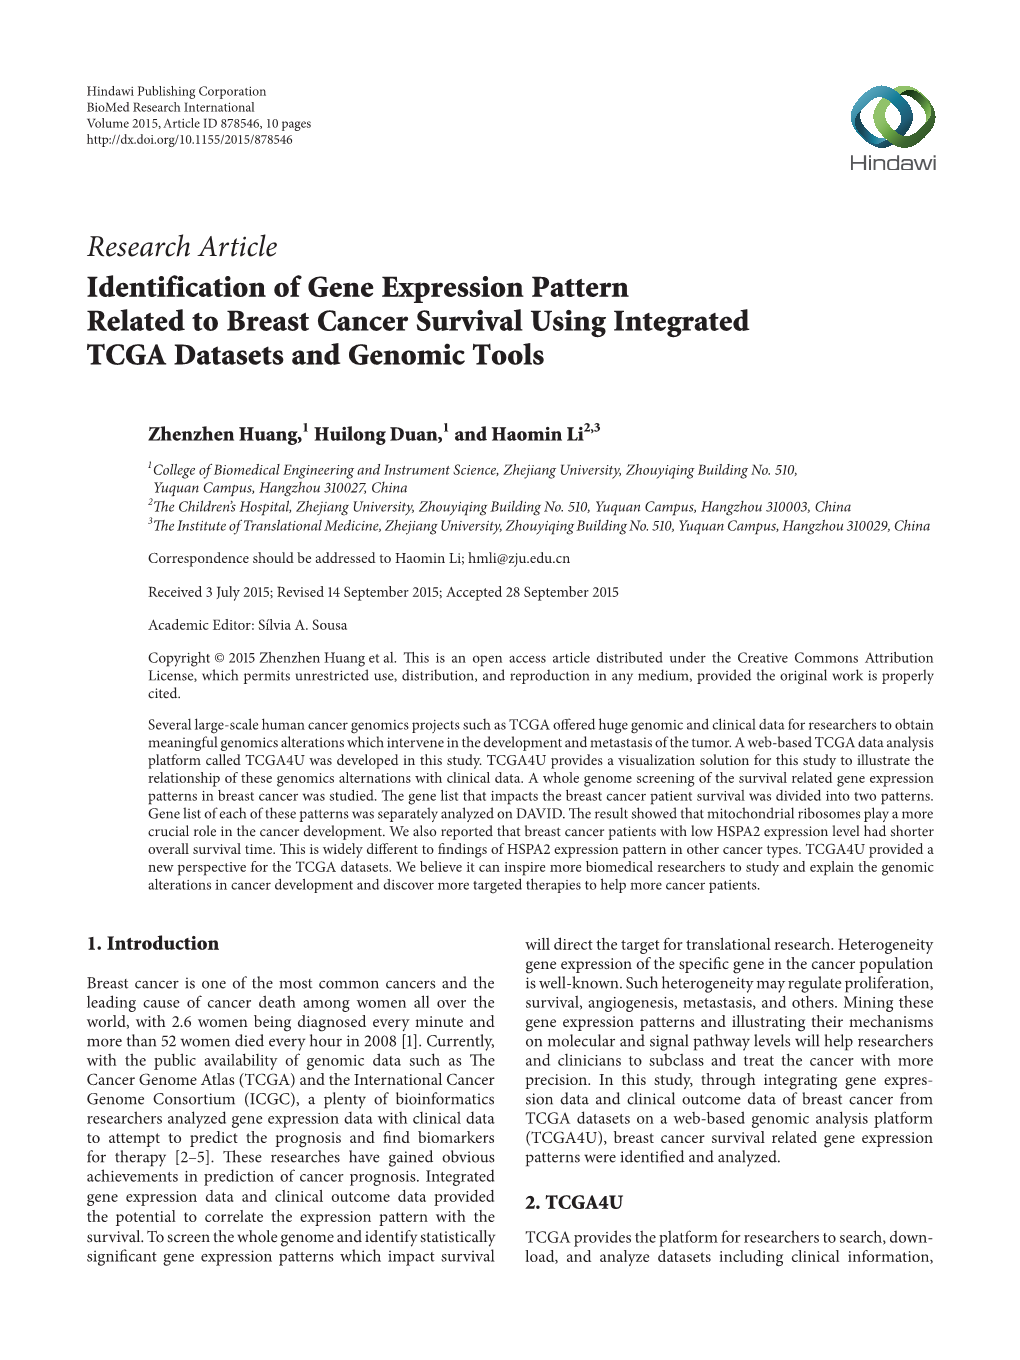 Research Article Identification of Gene Expression Pattern Related to Breast Cancer Survival Using Integrated TCGA Datasets and Genomic Tools